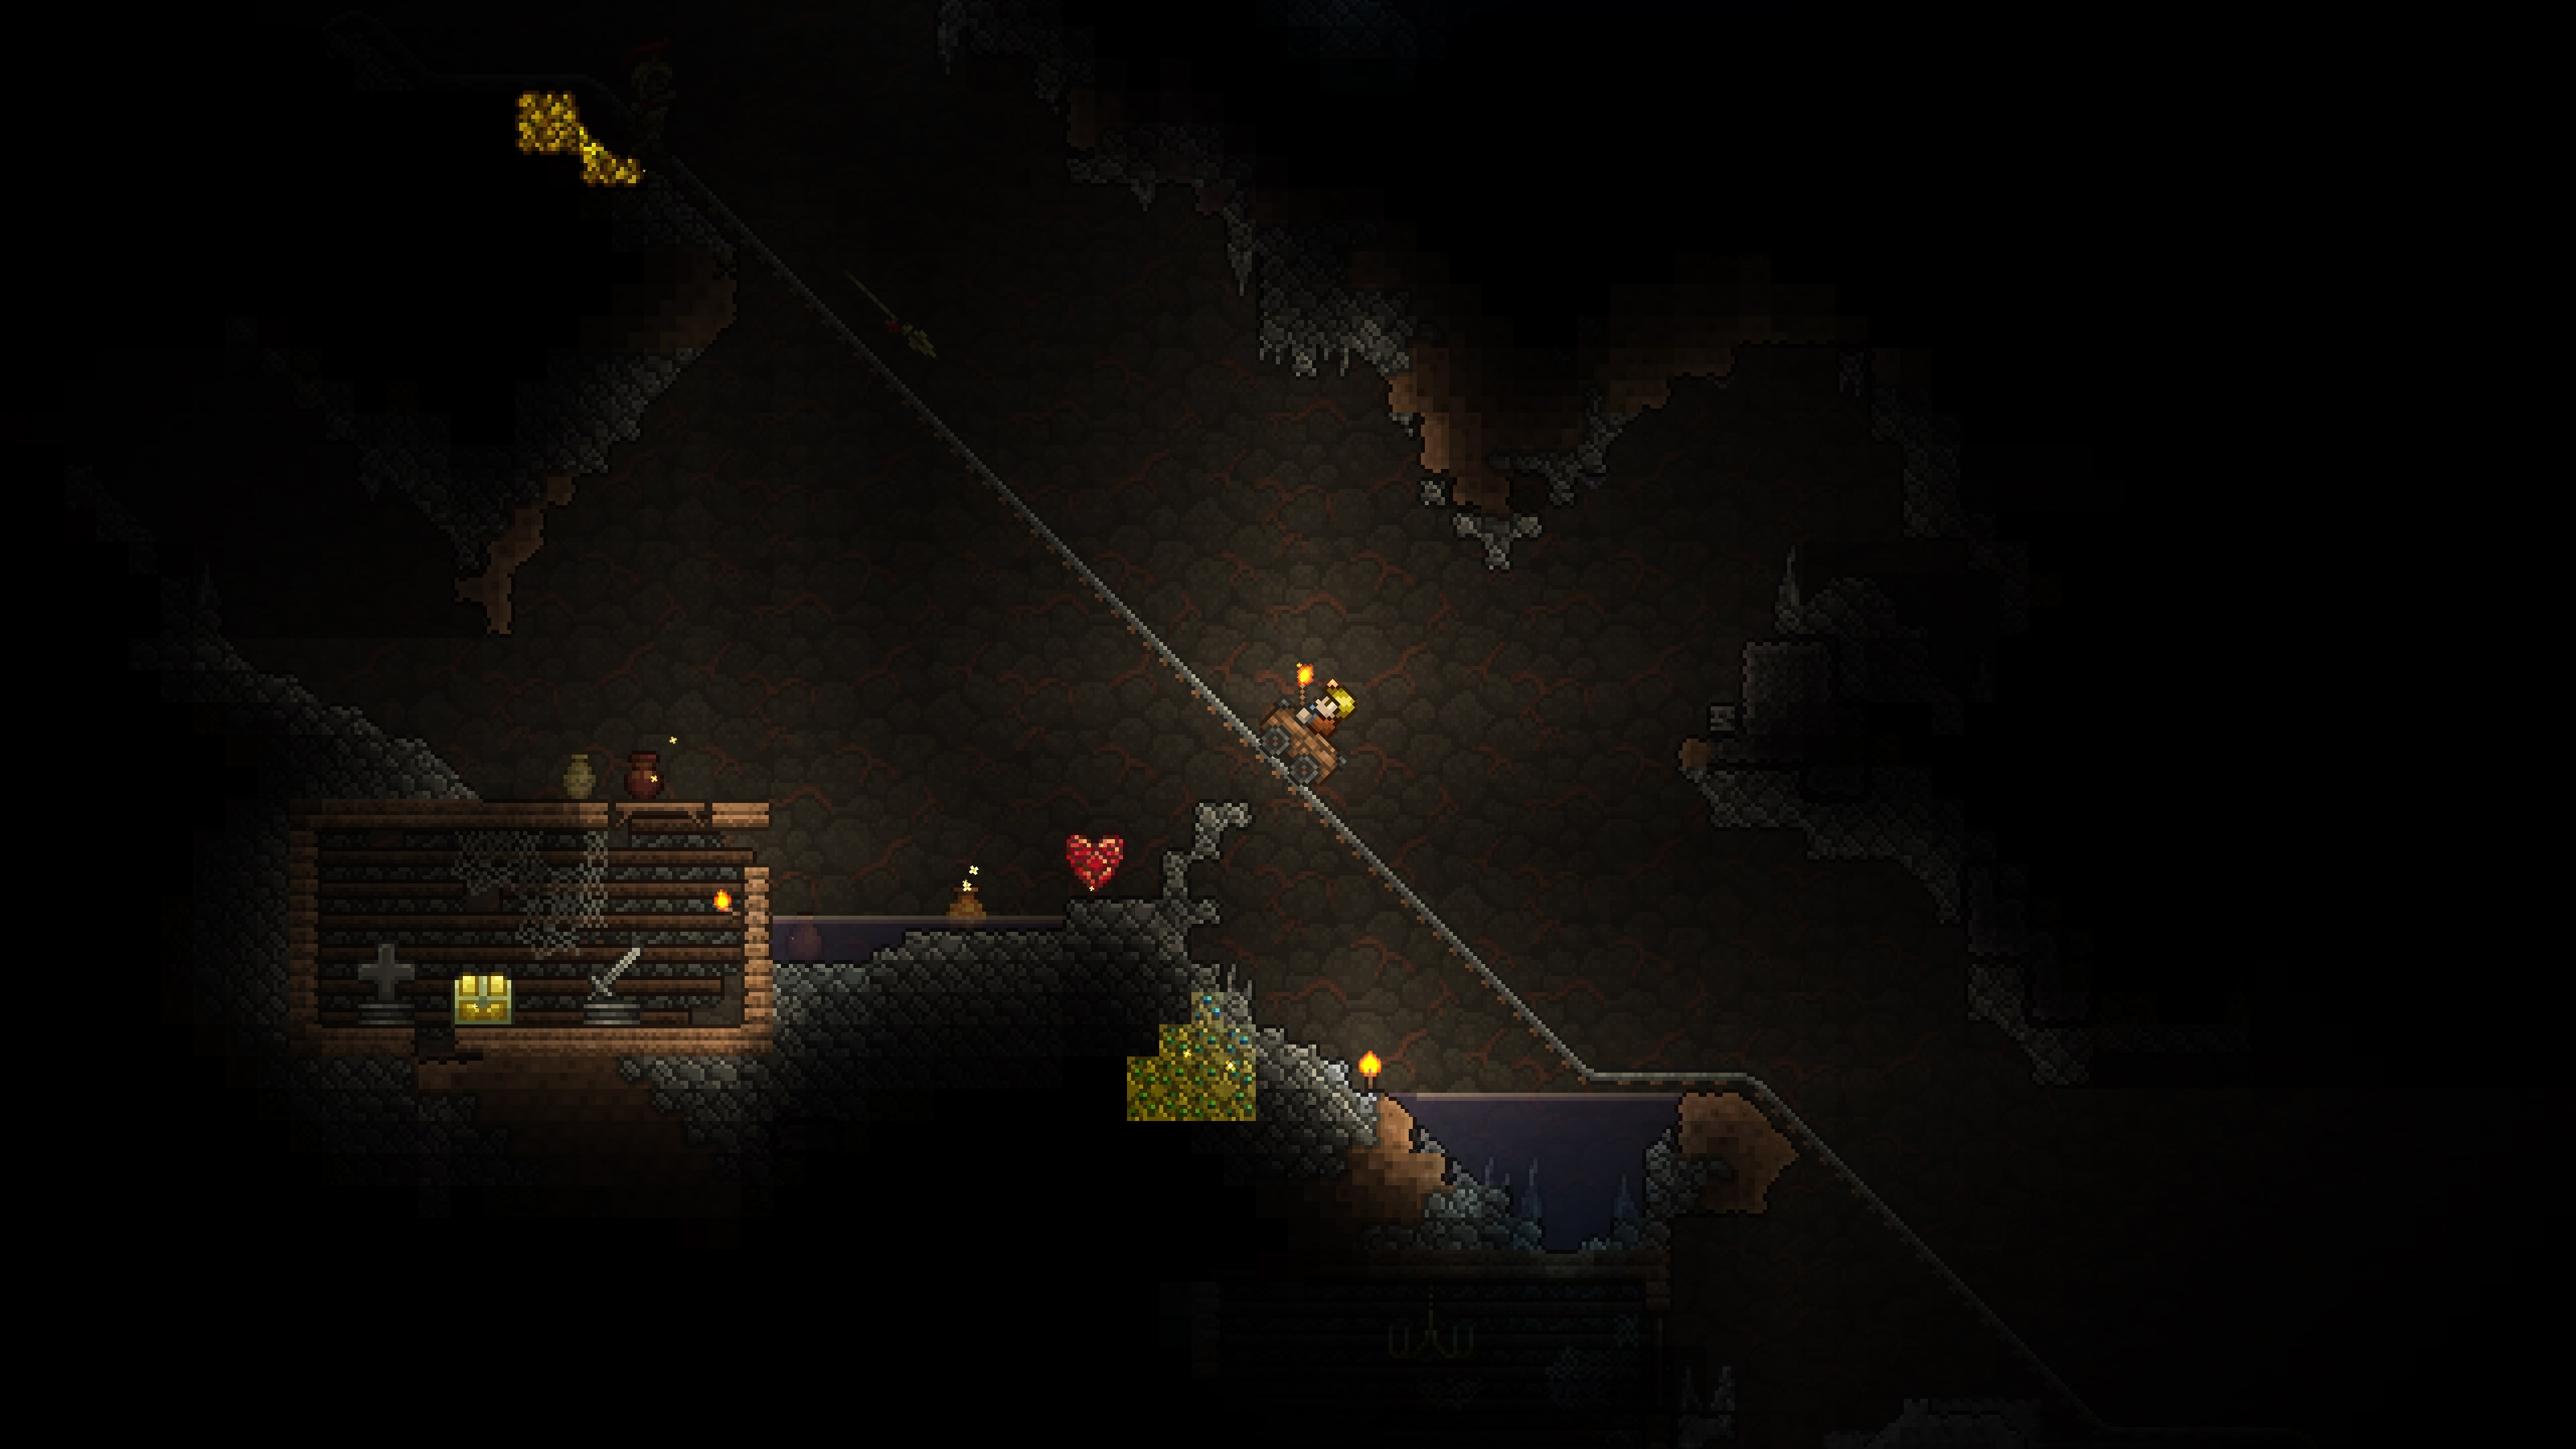 Bro the fourth wolf I killed I got Lilith's necklace : r/Terraria